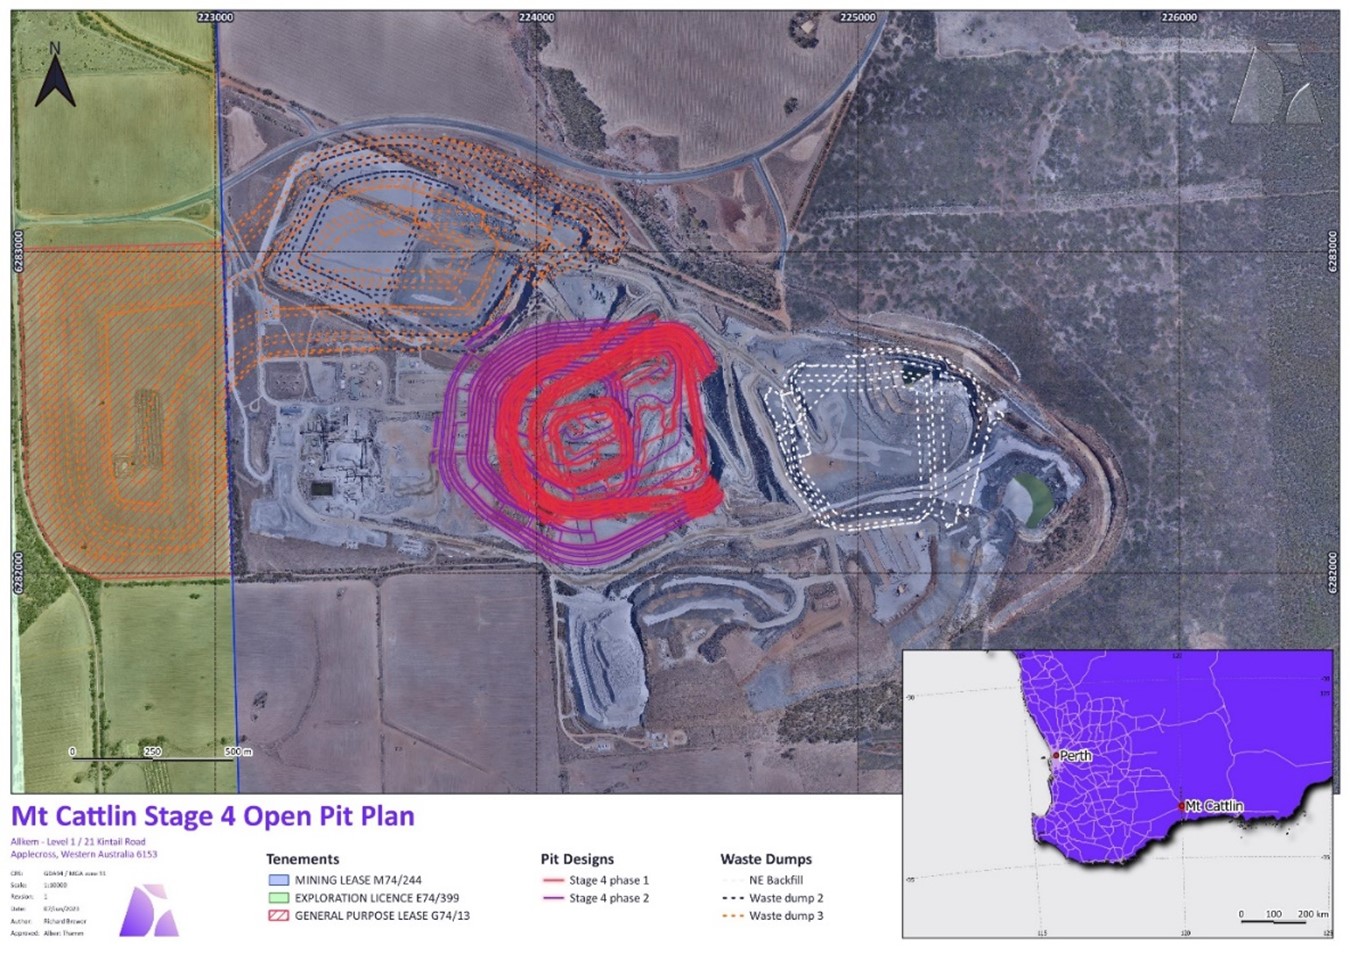 Mt Cattlin Stage 4 Open Pit Plan